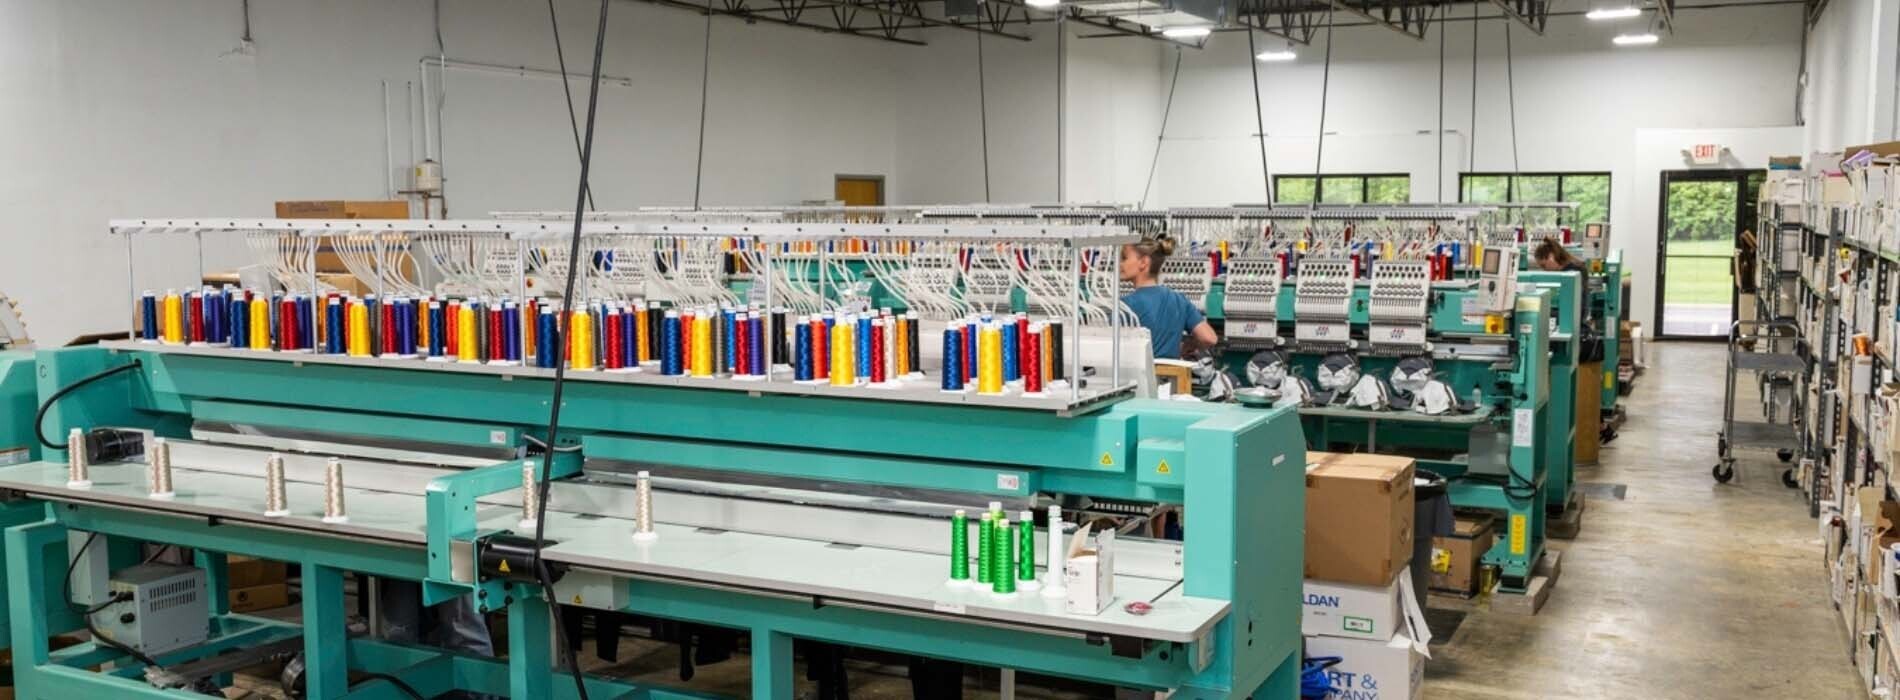 rows of embroidery machines with thread